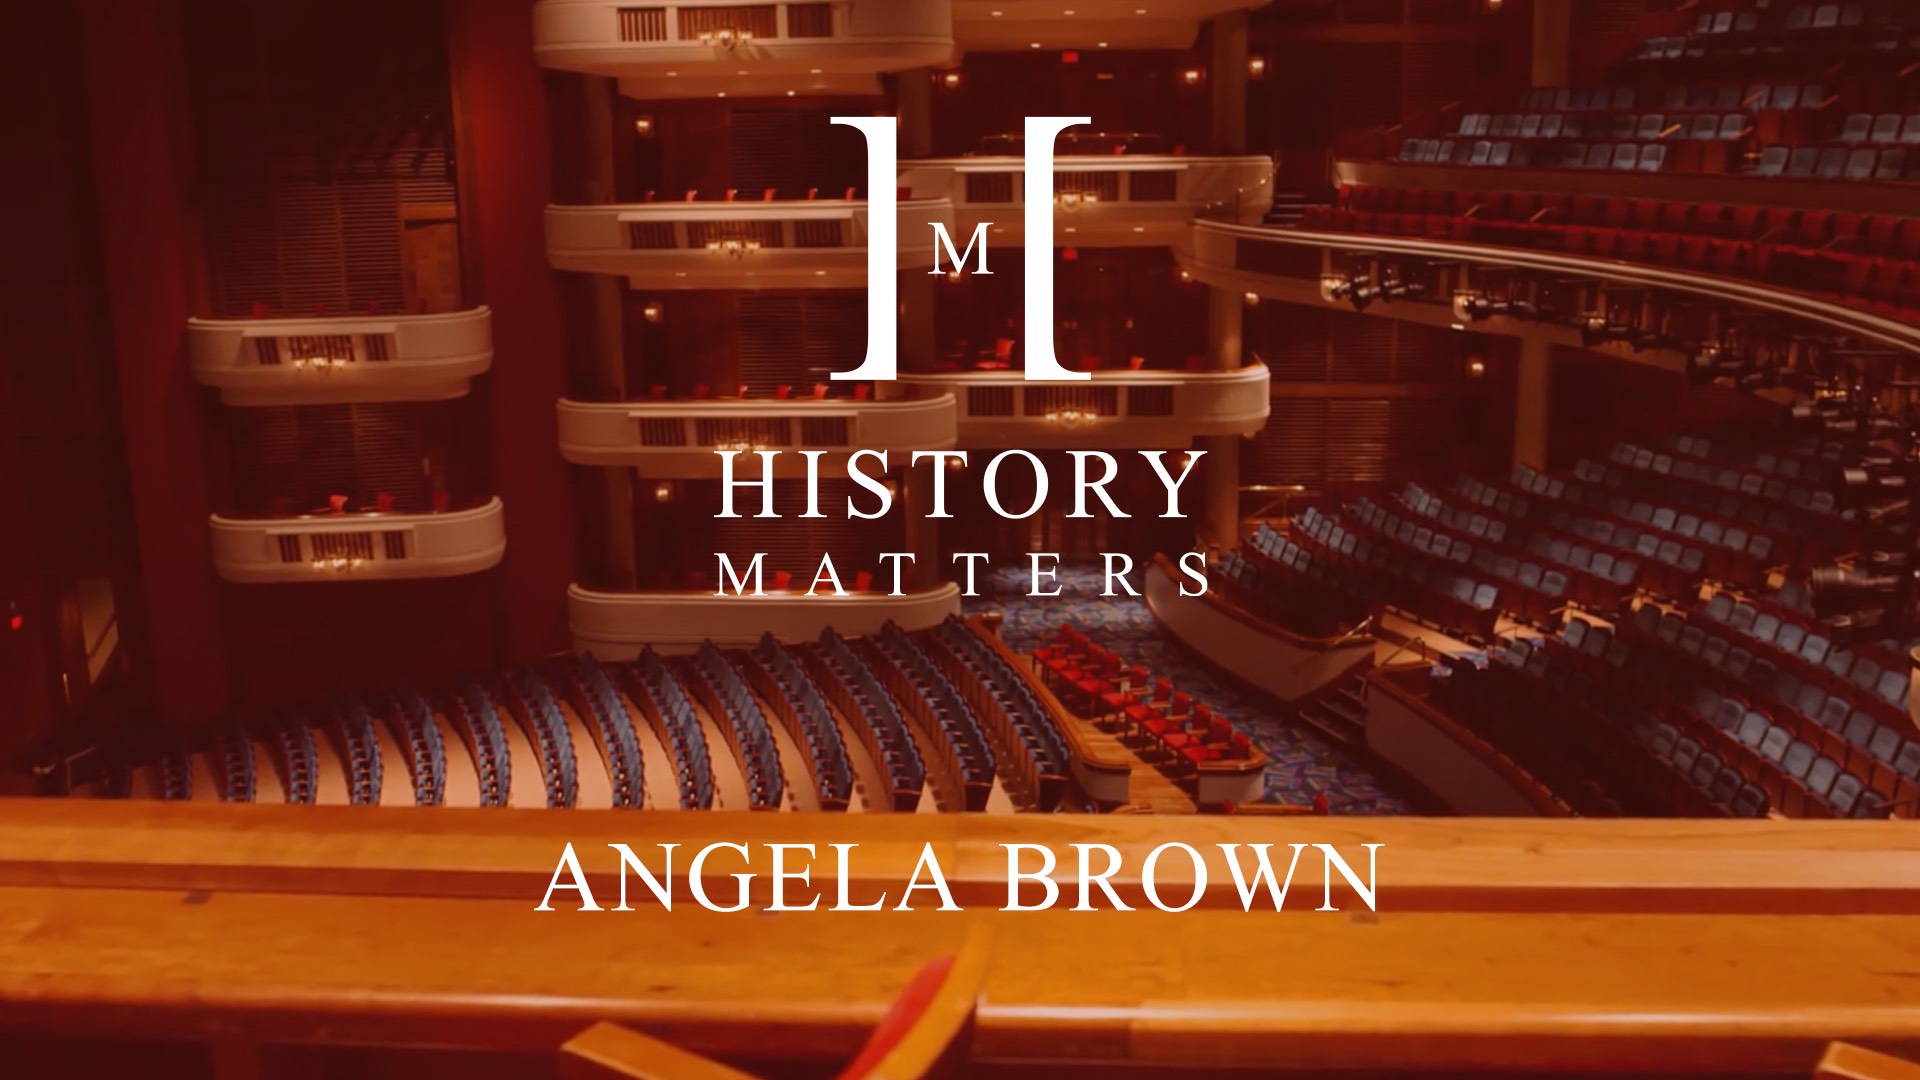 IU C&I Studios Page History Matters Angela Brown by Victoria Ranger with background showing interior of a theater from a balcony